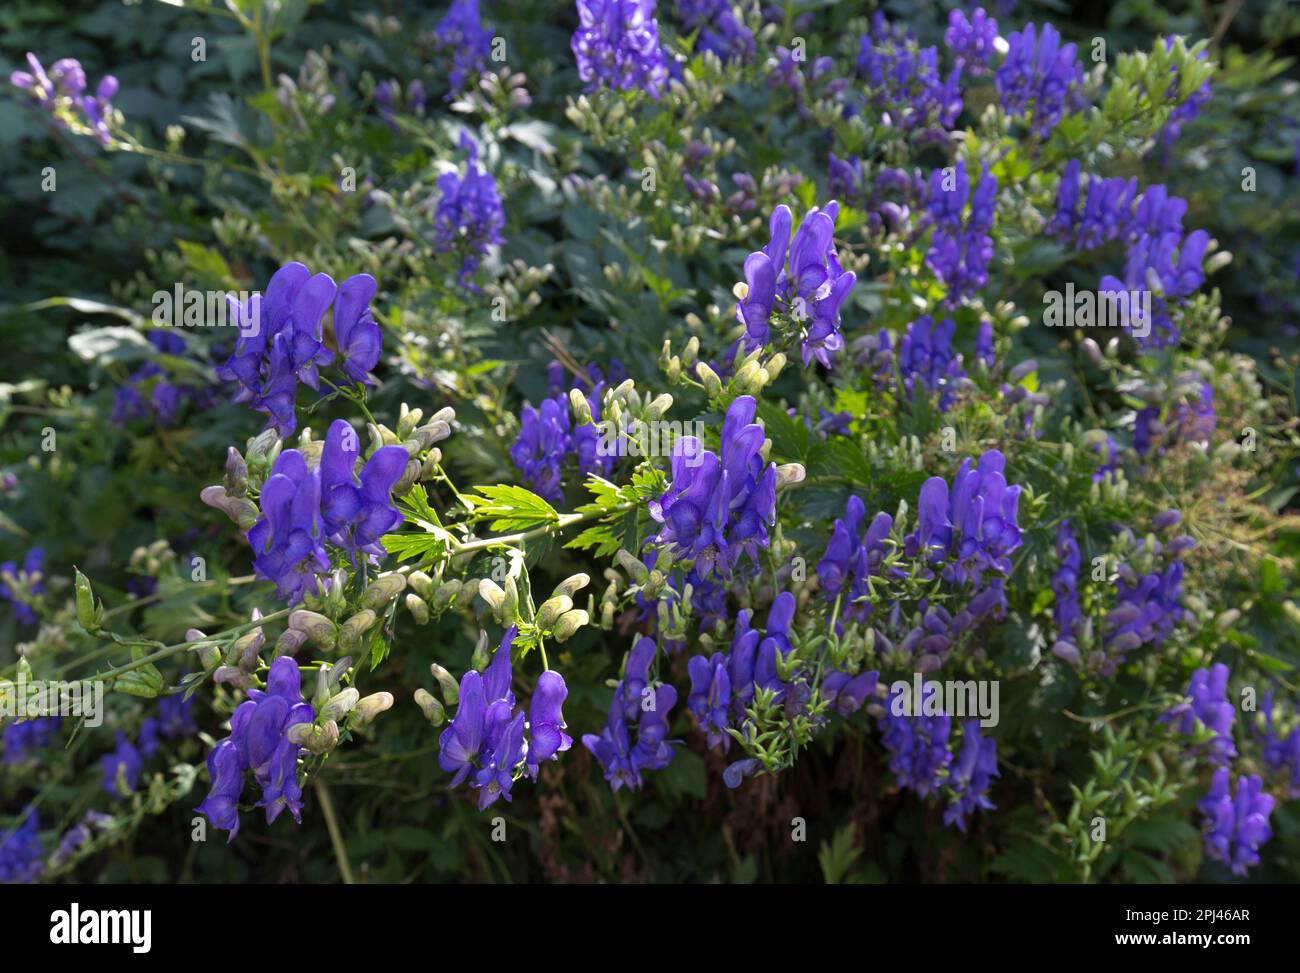 View of monkshood flowers during spring in Italy Stock Photo